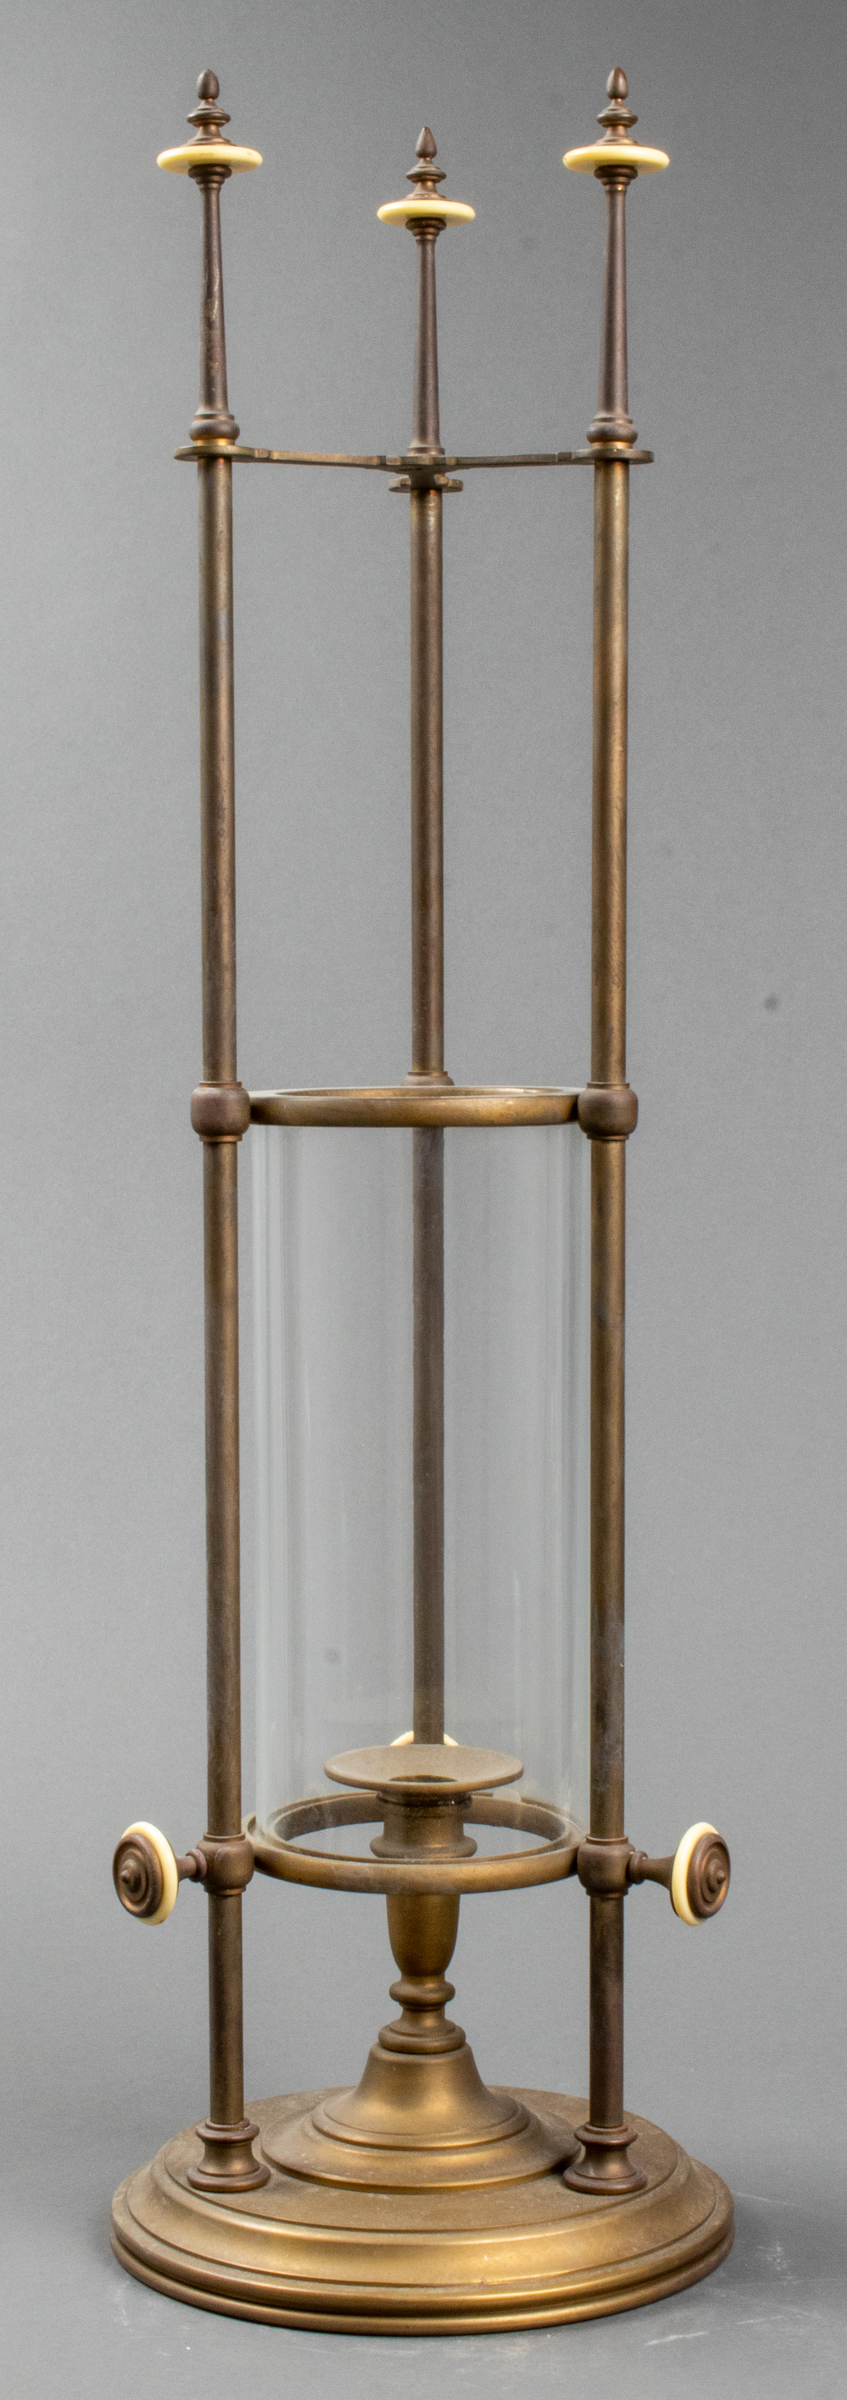 BRASS CANDLE HOLDER WITH HURRICANE 3c3467